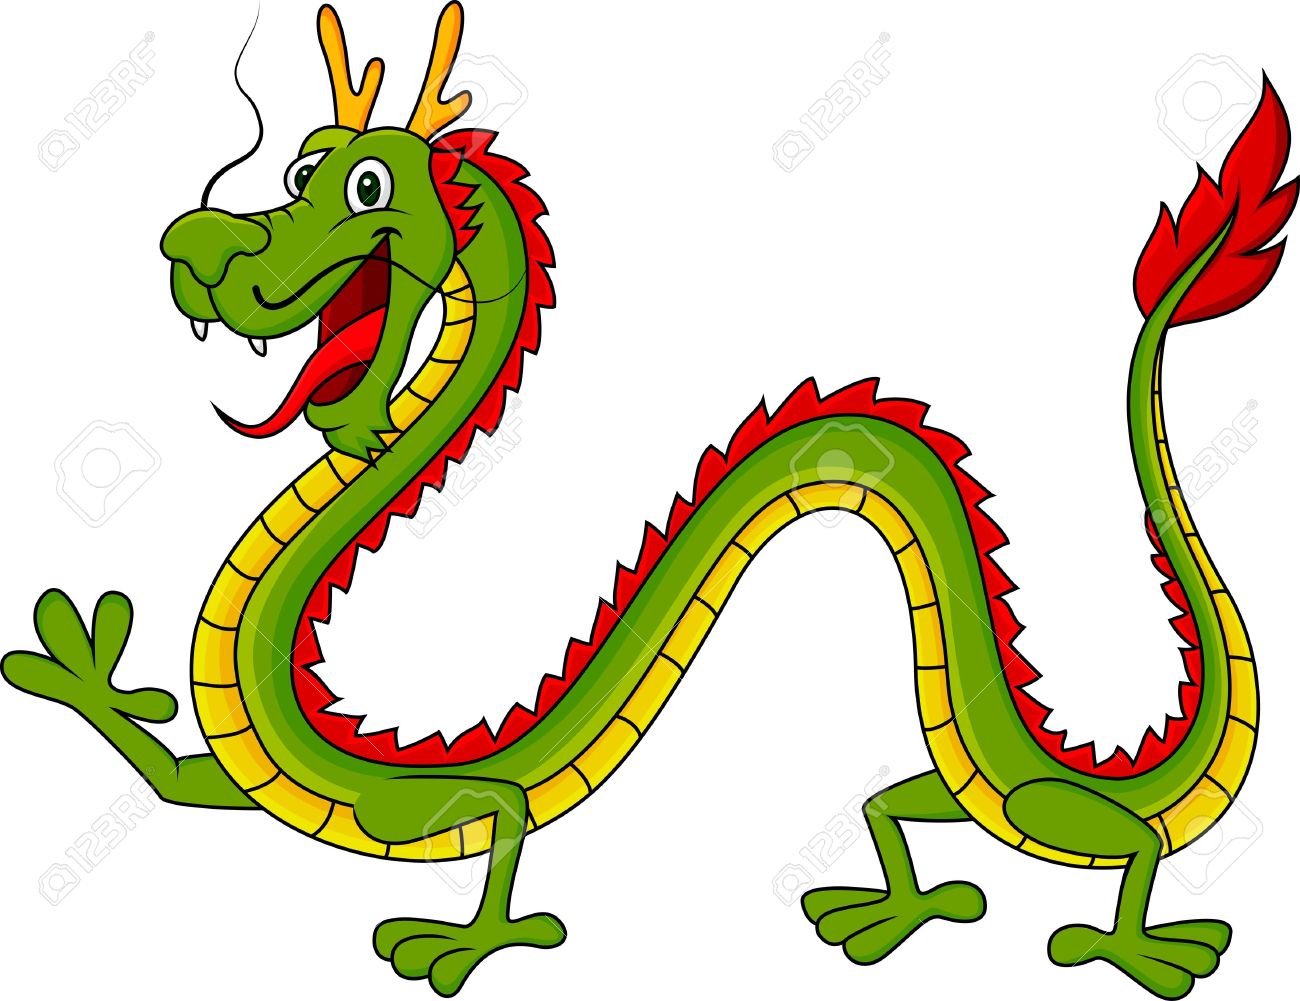 Chinese Dragon Images